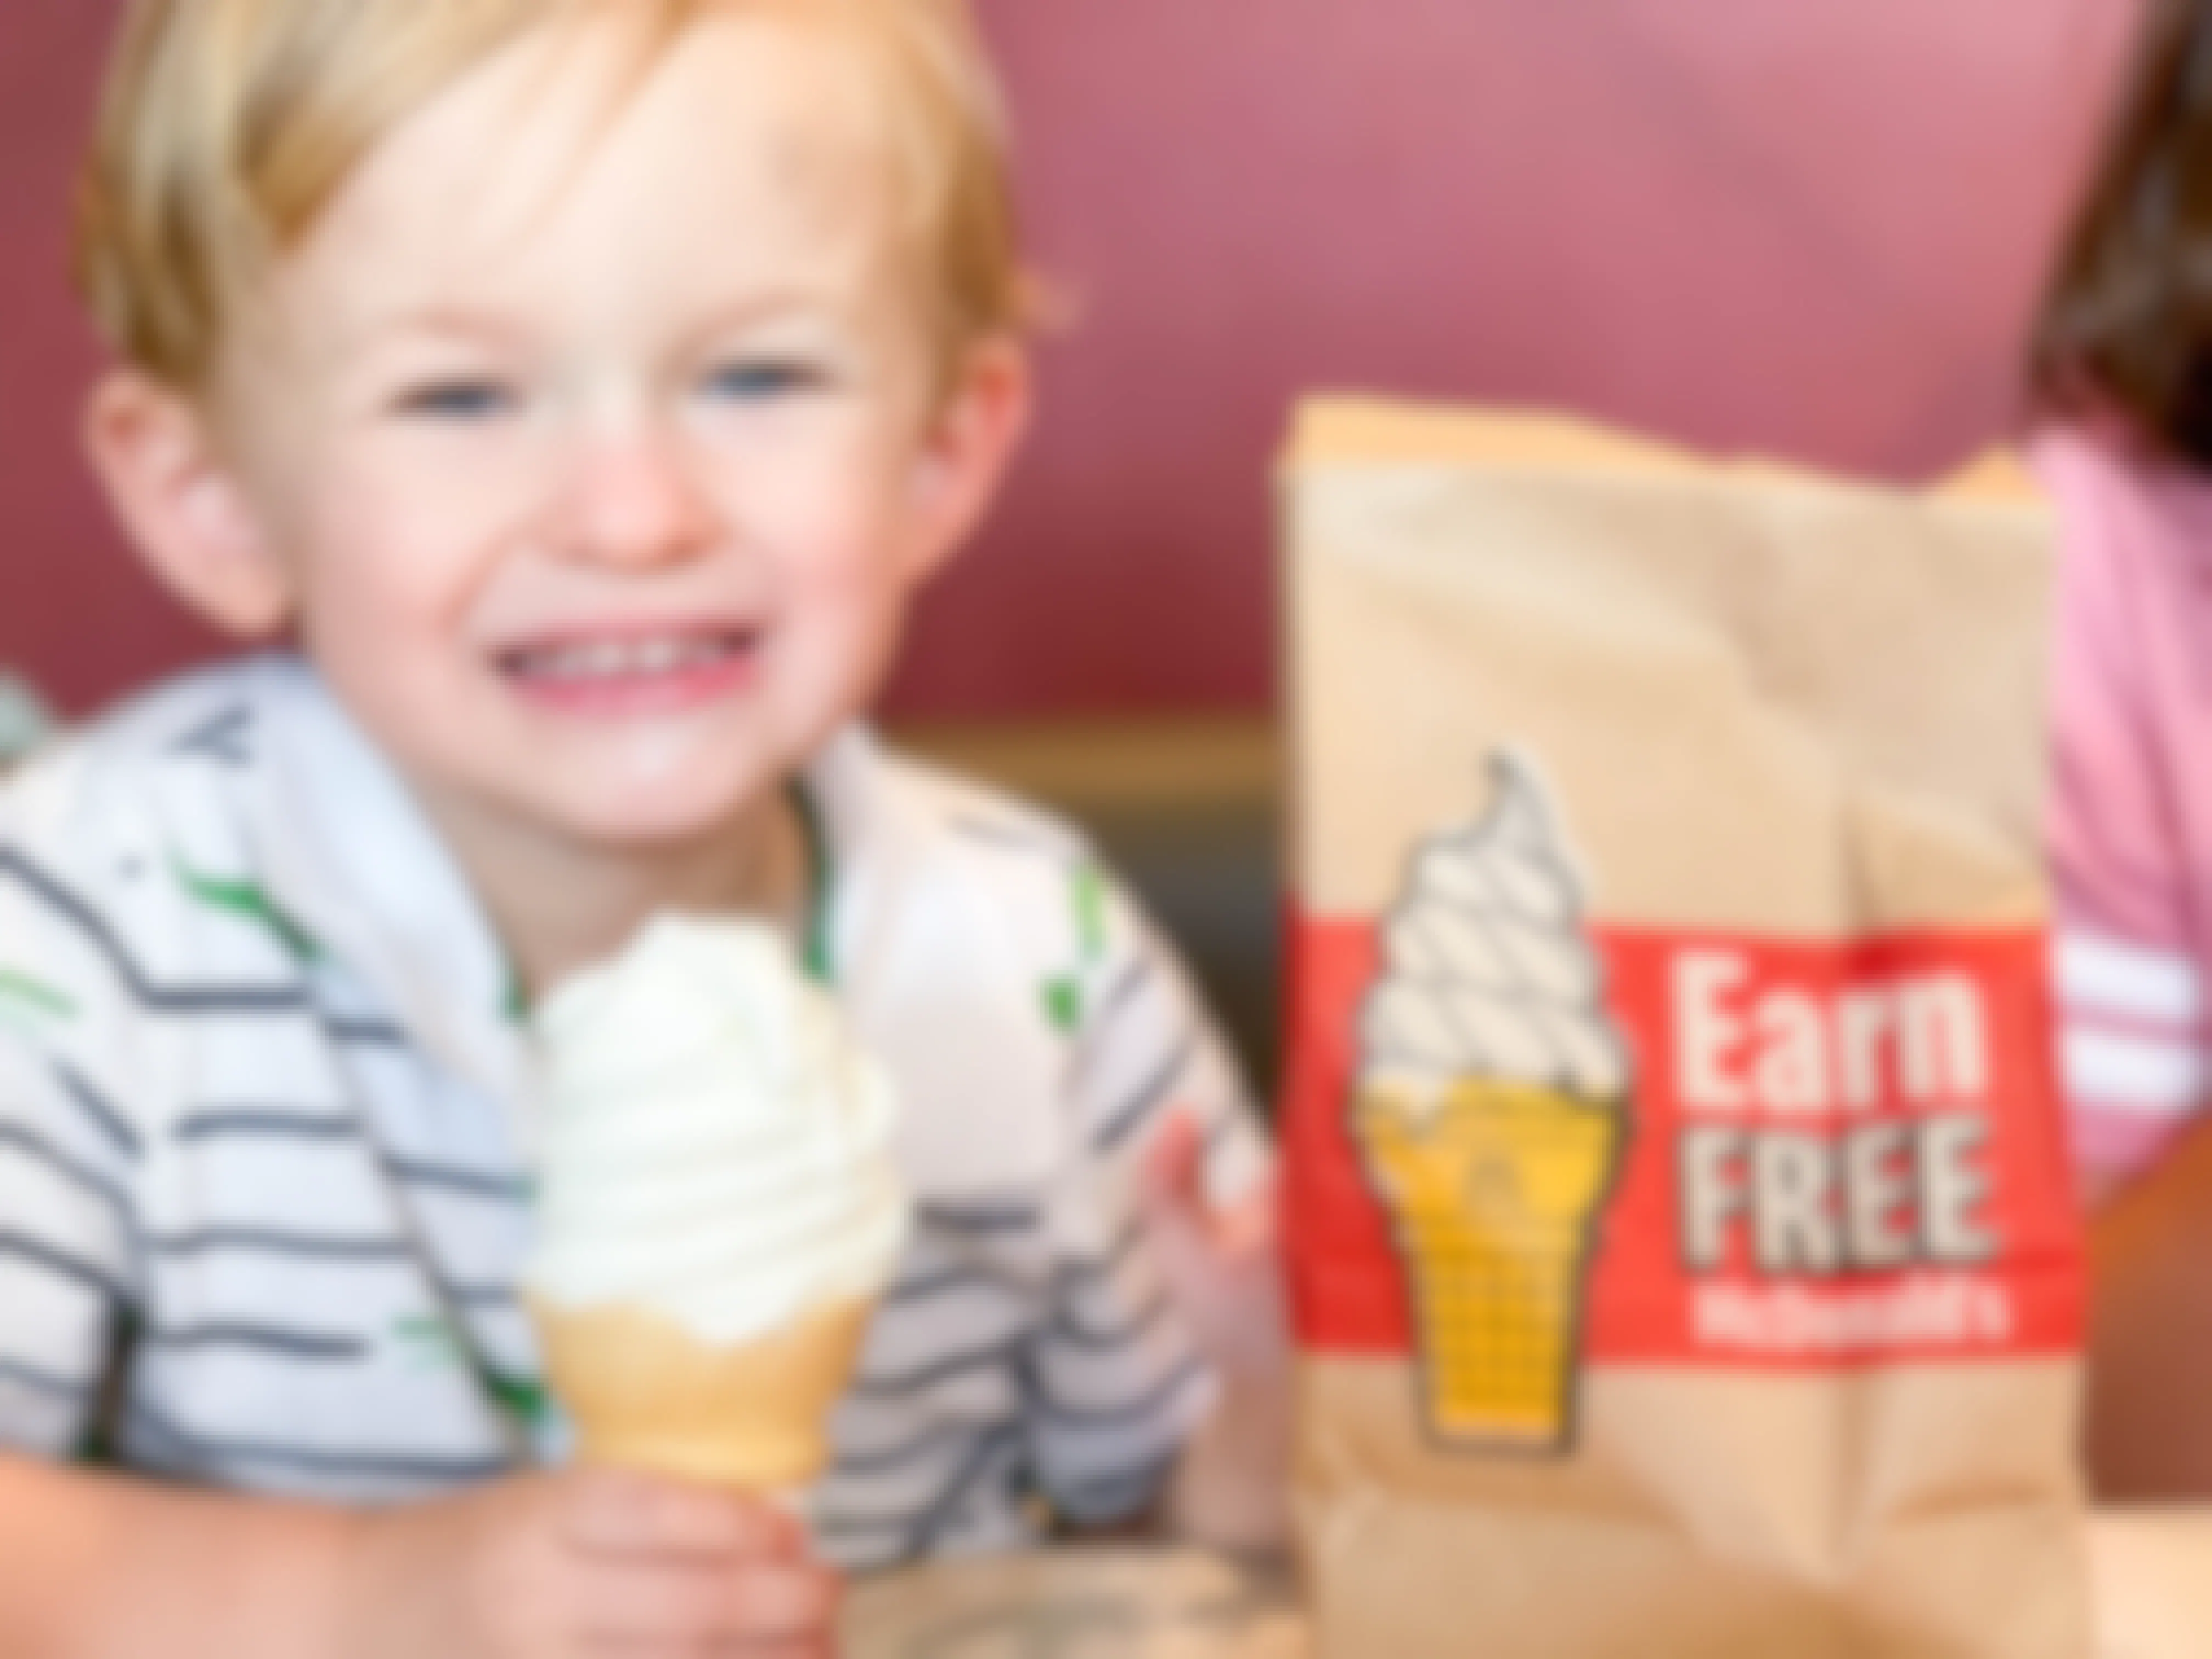 A child sitting in a booth at McDonald's, holding a soft serve ice cream cone next to a takeout bag that says, "Earn Free McDonald's